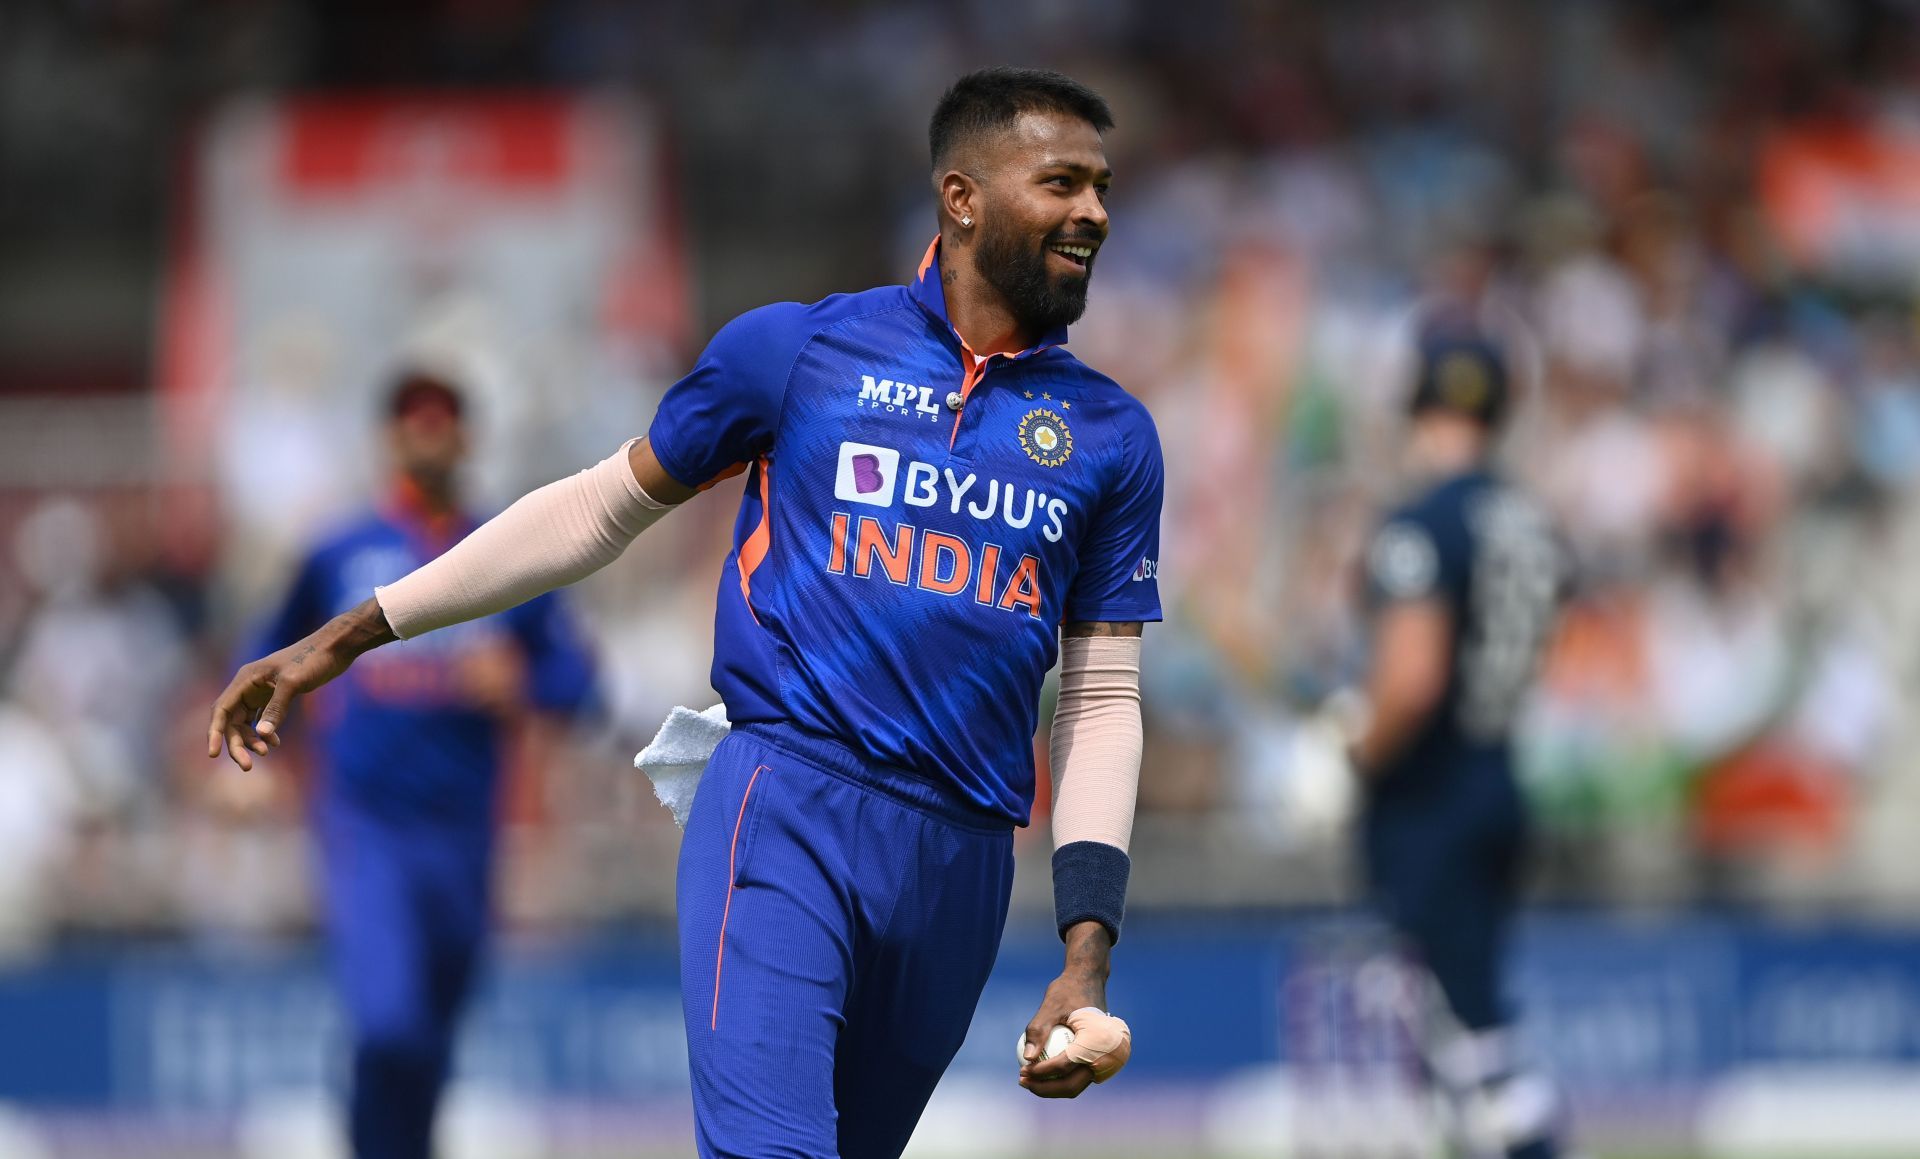 Hardik Pandya became the first Indian to reach 50 wickets and 500 runs in the shortest format of the game